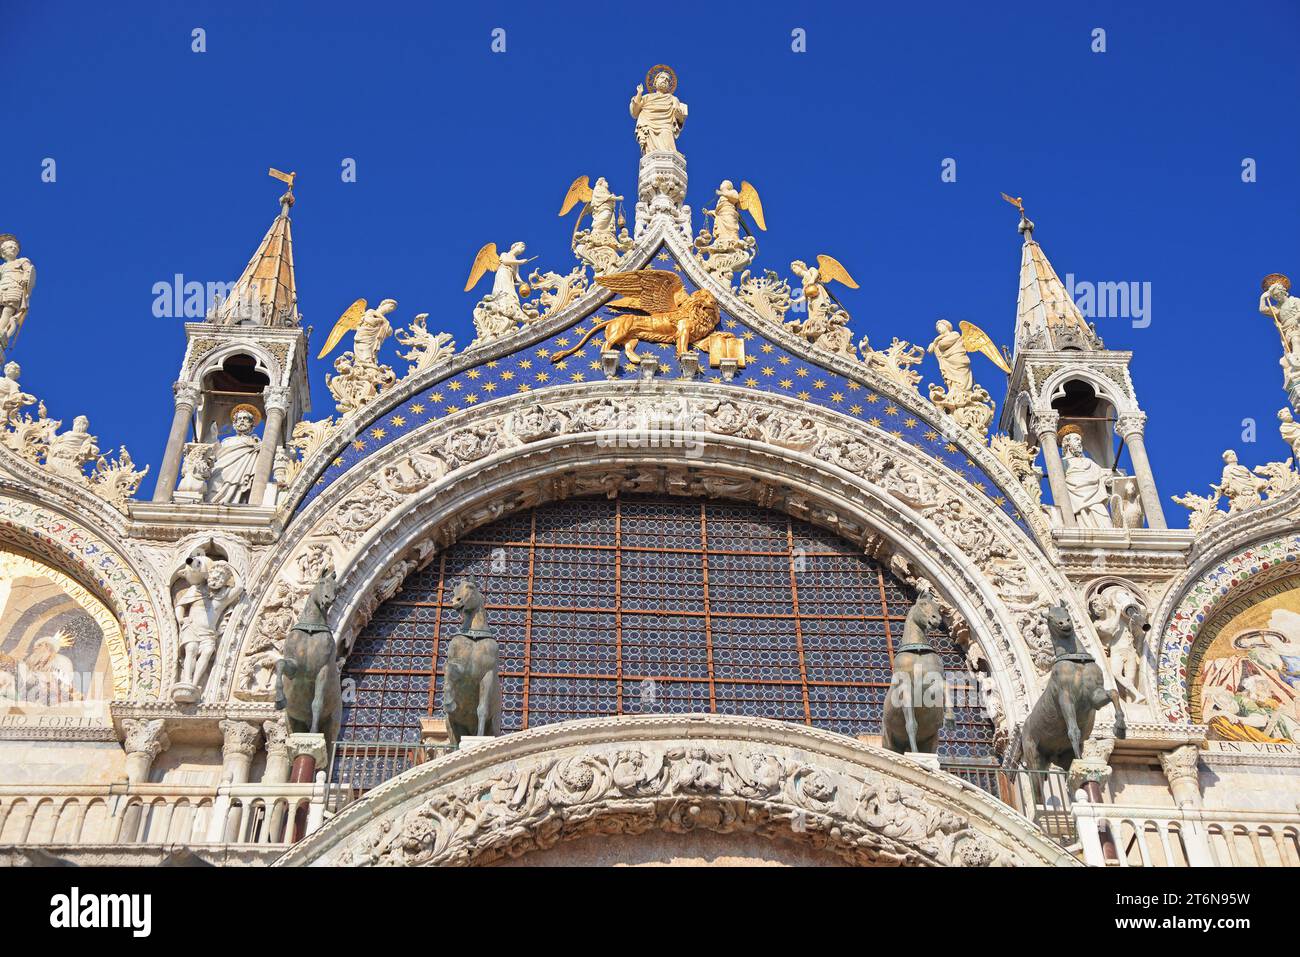 Beautiful artwork decorating the Patriarchal Cathedral Basilica of Saint Mark (Basilica Cattedrale Patriarcale di San Marco), Venice, Italy Stock Photo